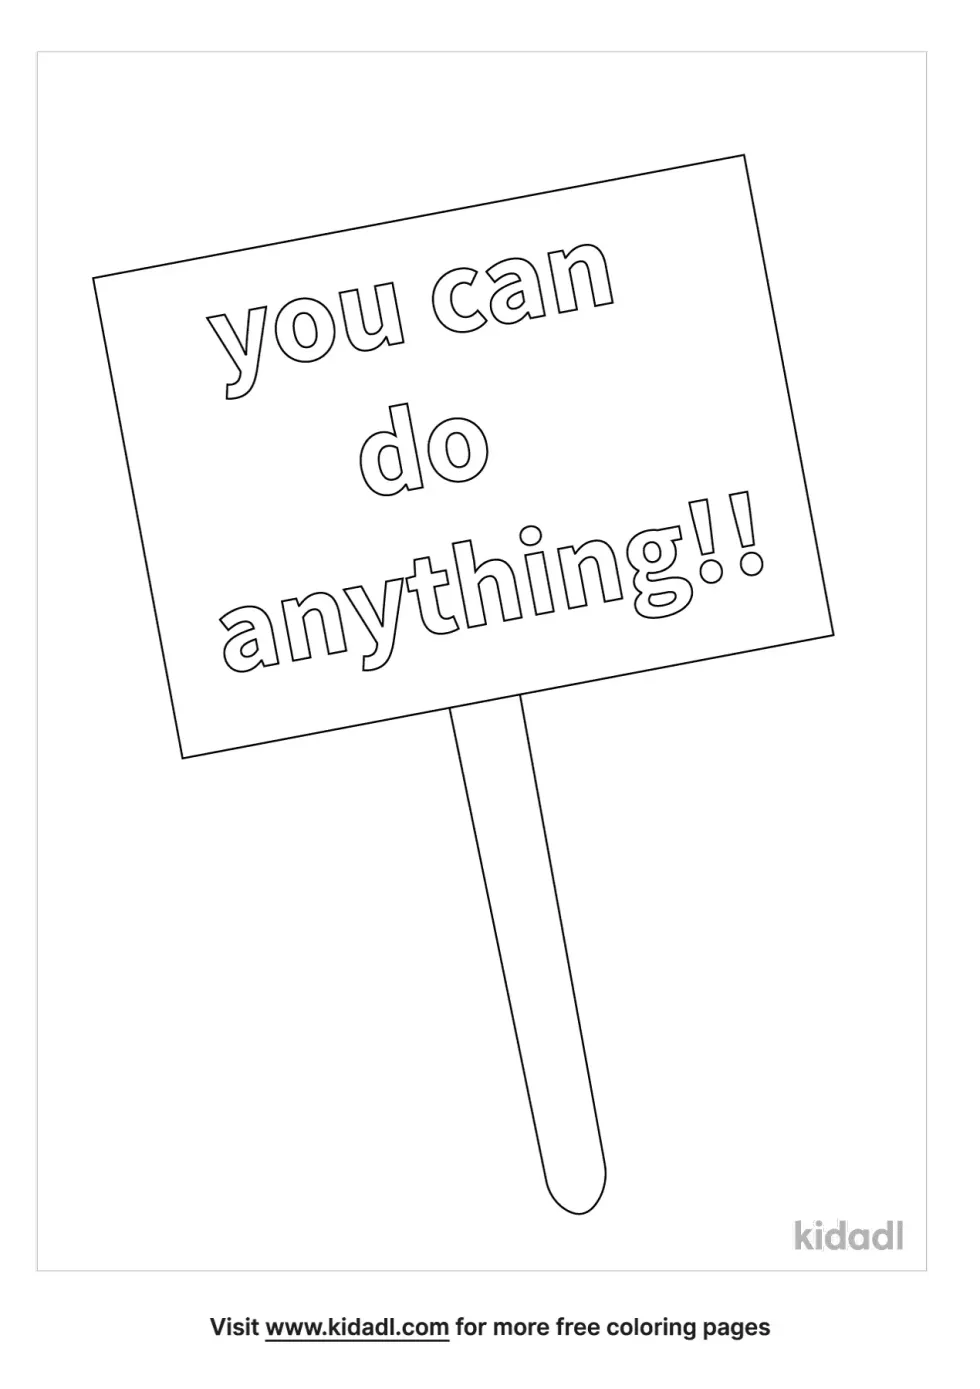 You Can Do Anything